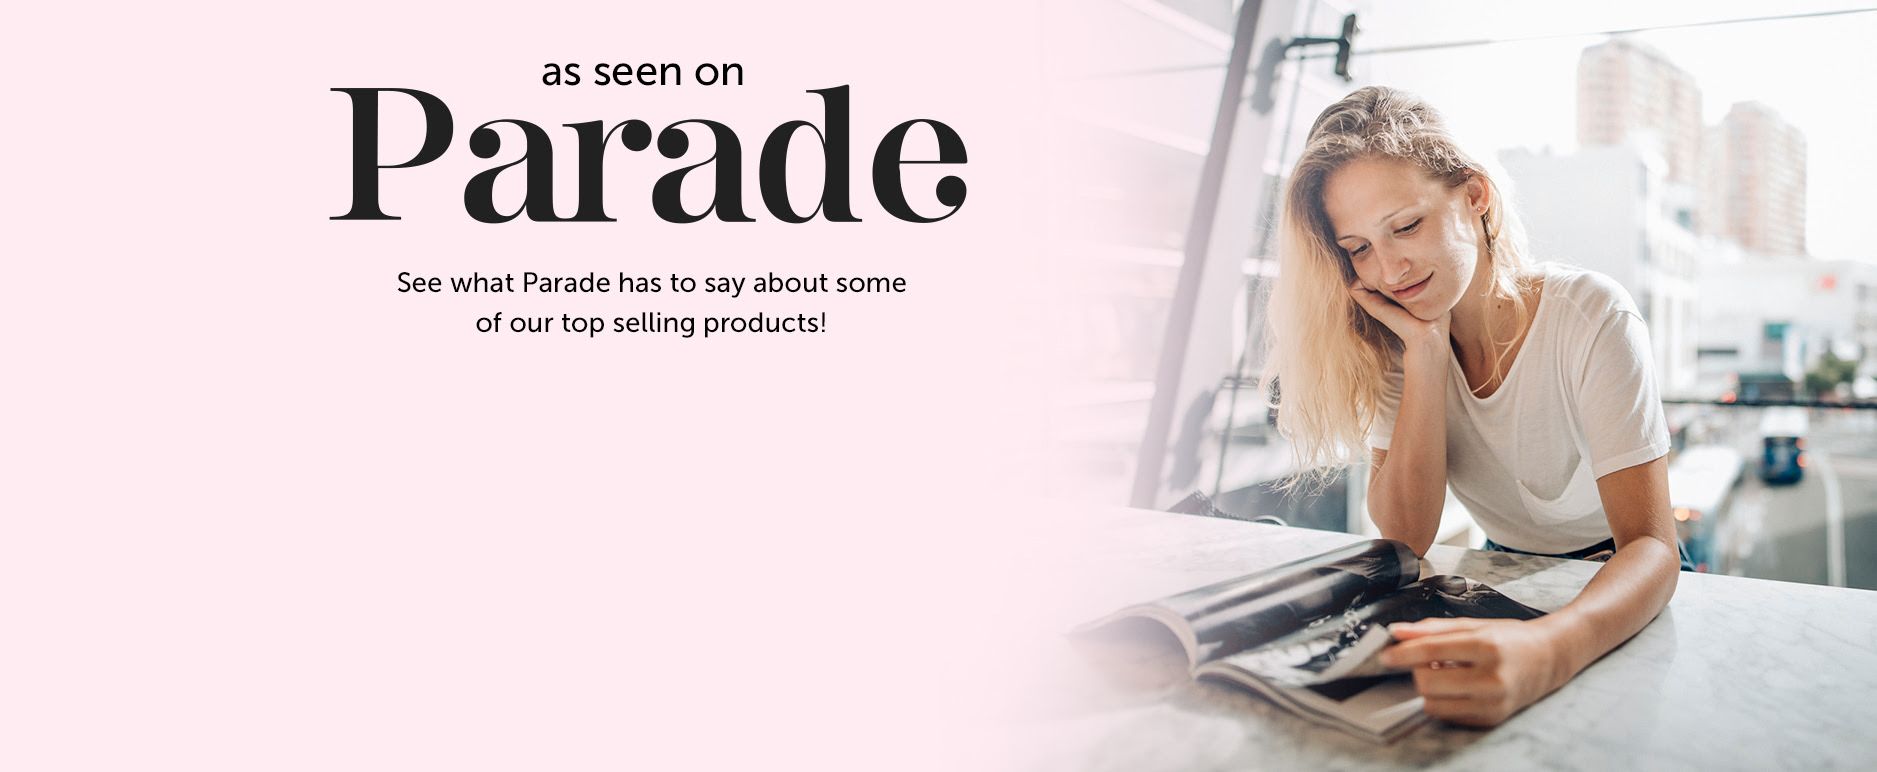 As seen on Parade: See what Parade Magazine has to say about some of our top-selling products!